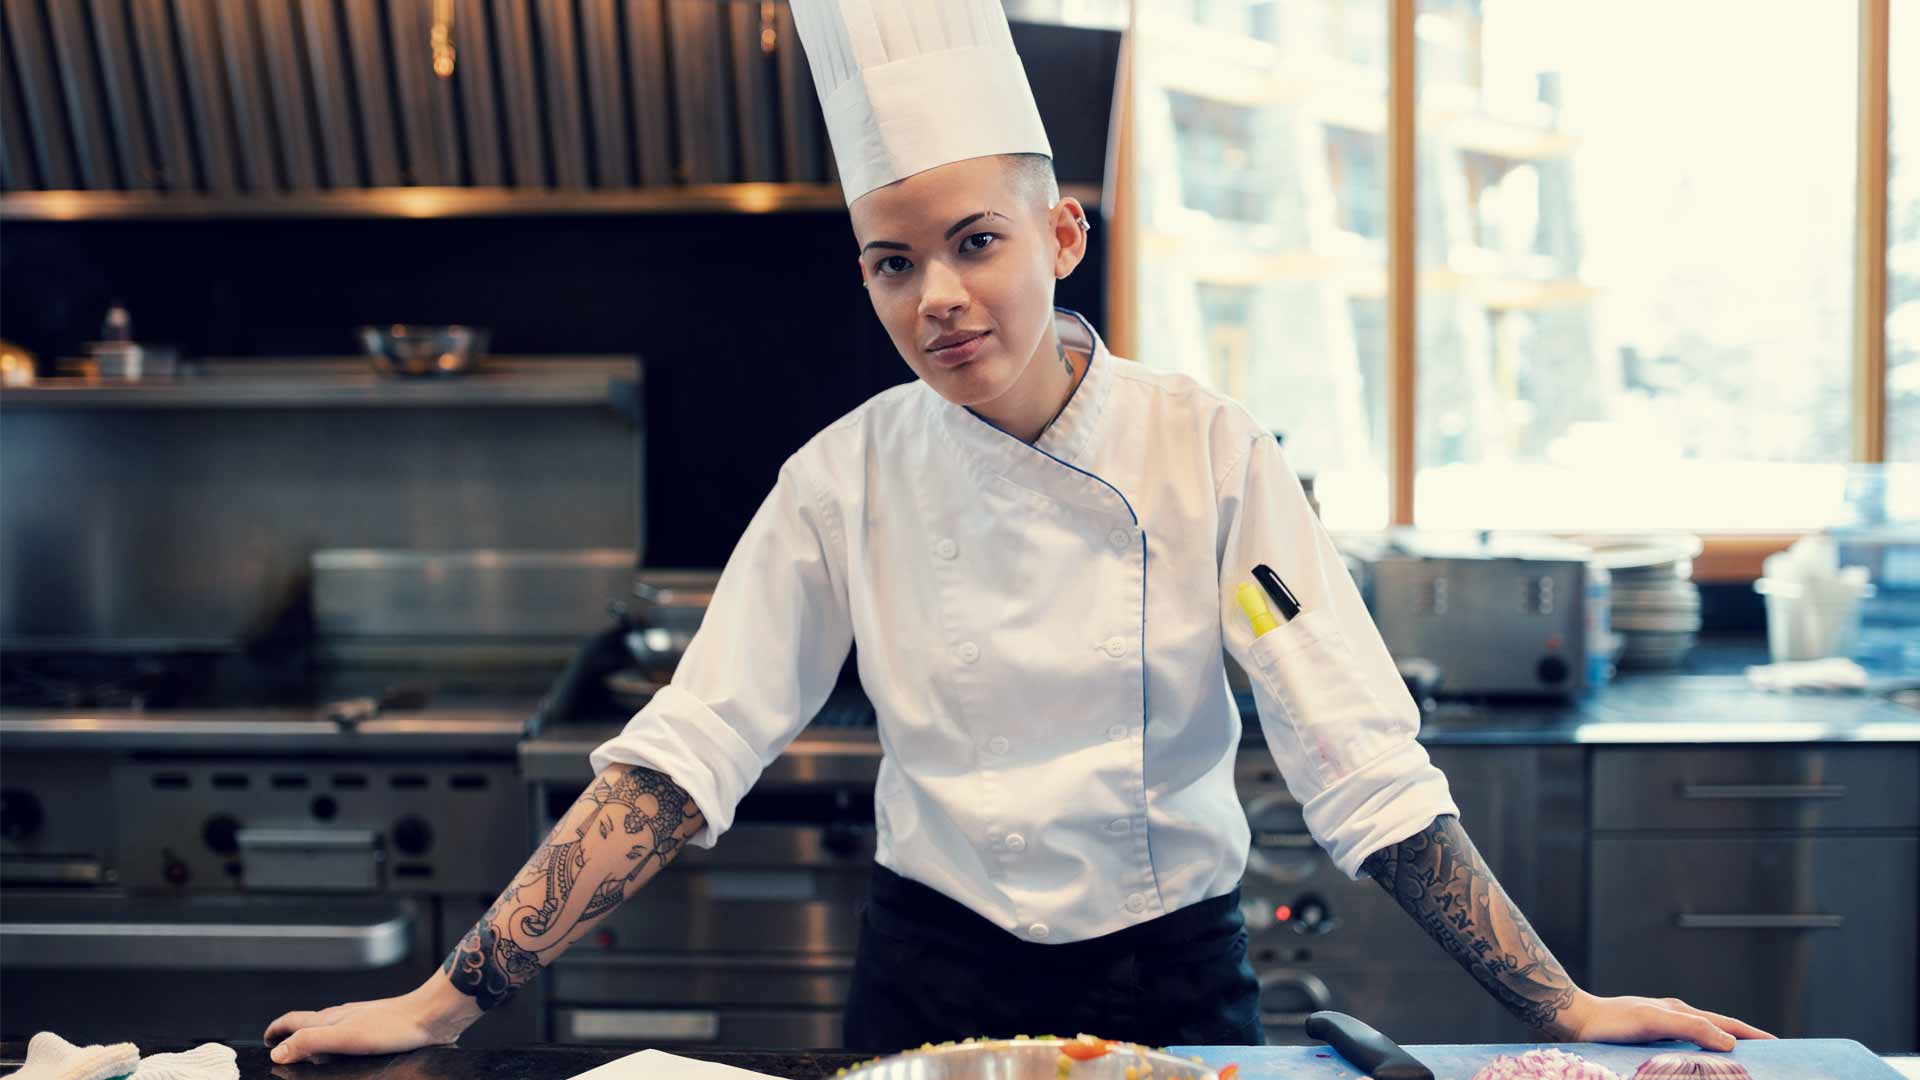 Chef standing at a counter in a kitchen